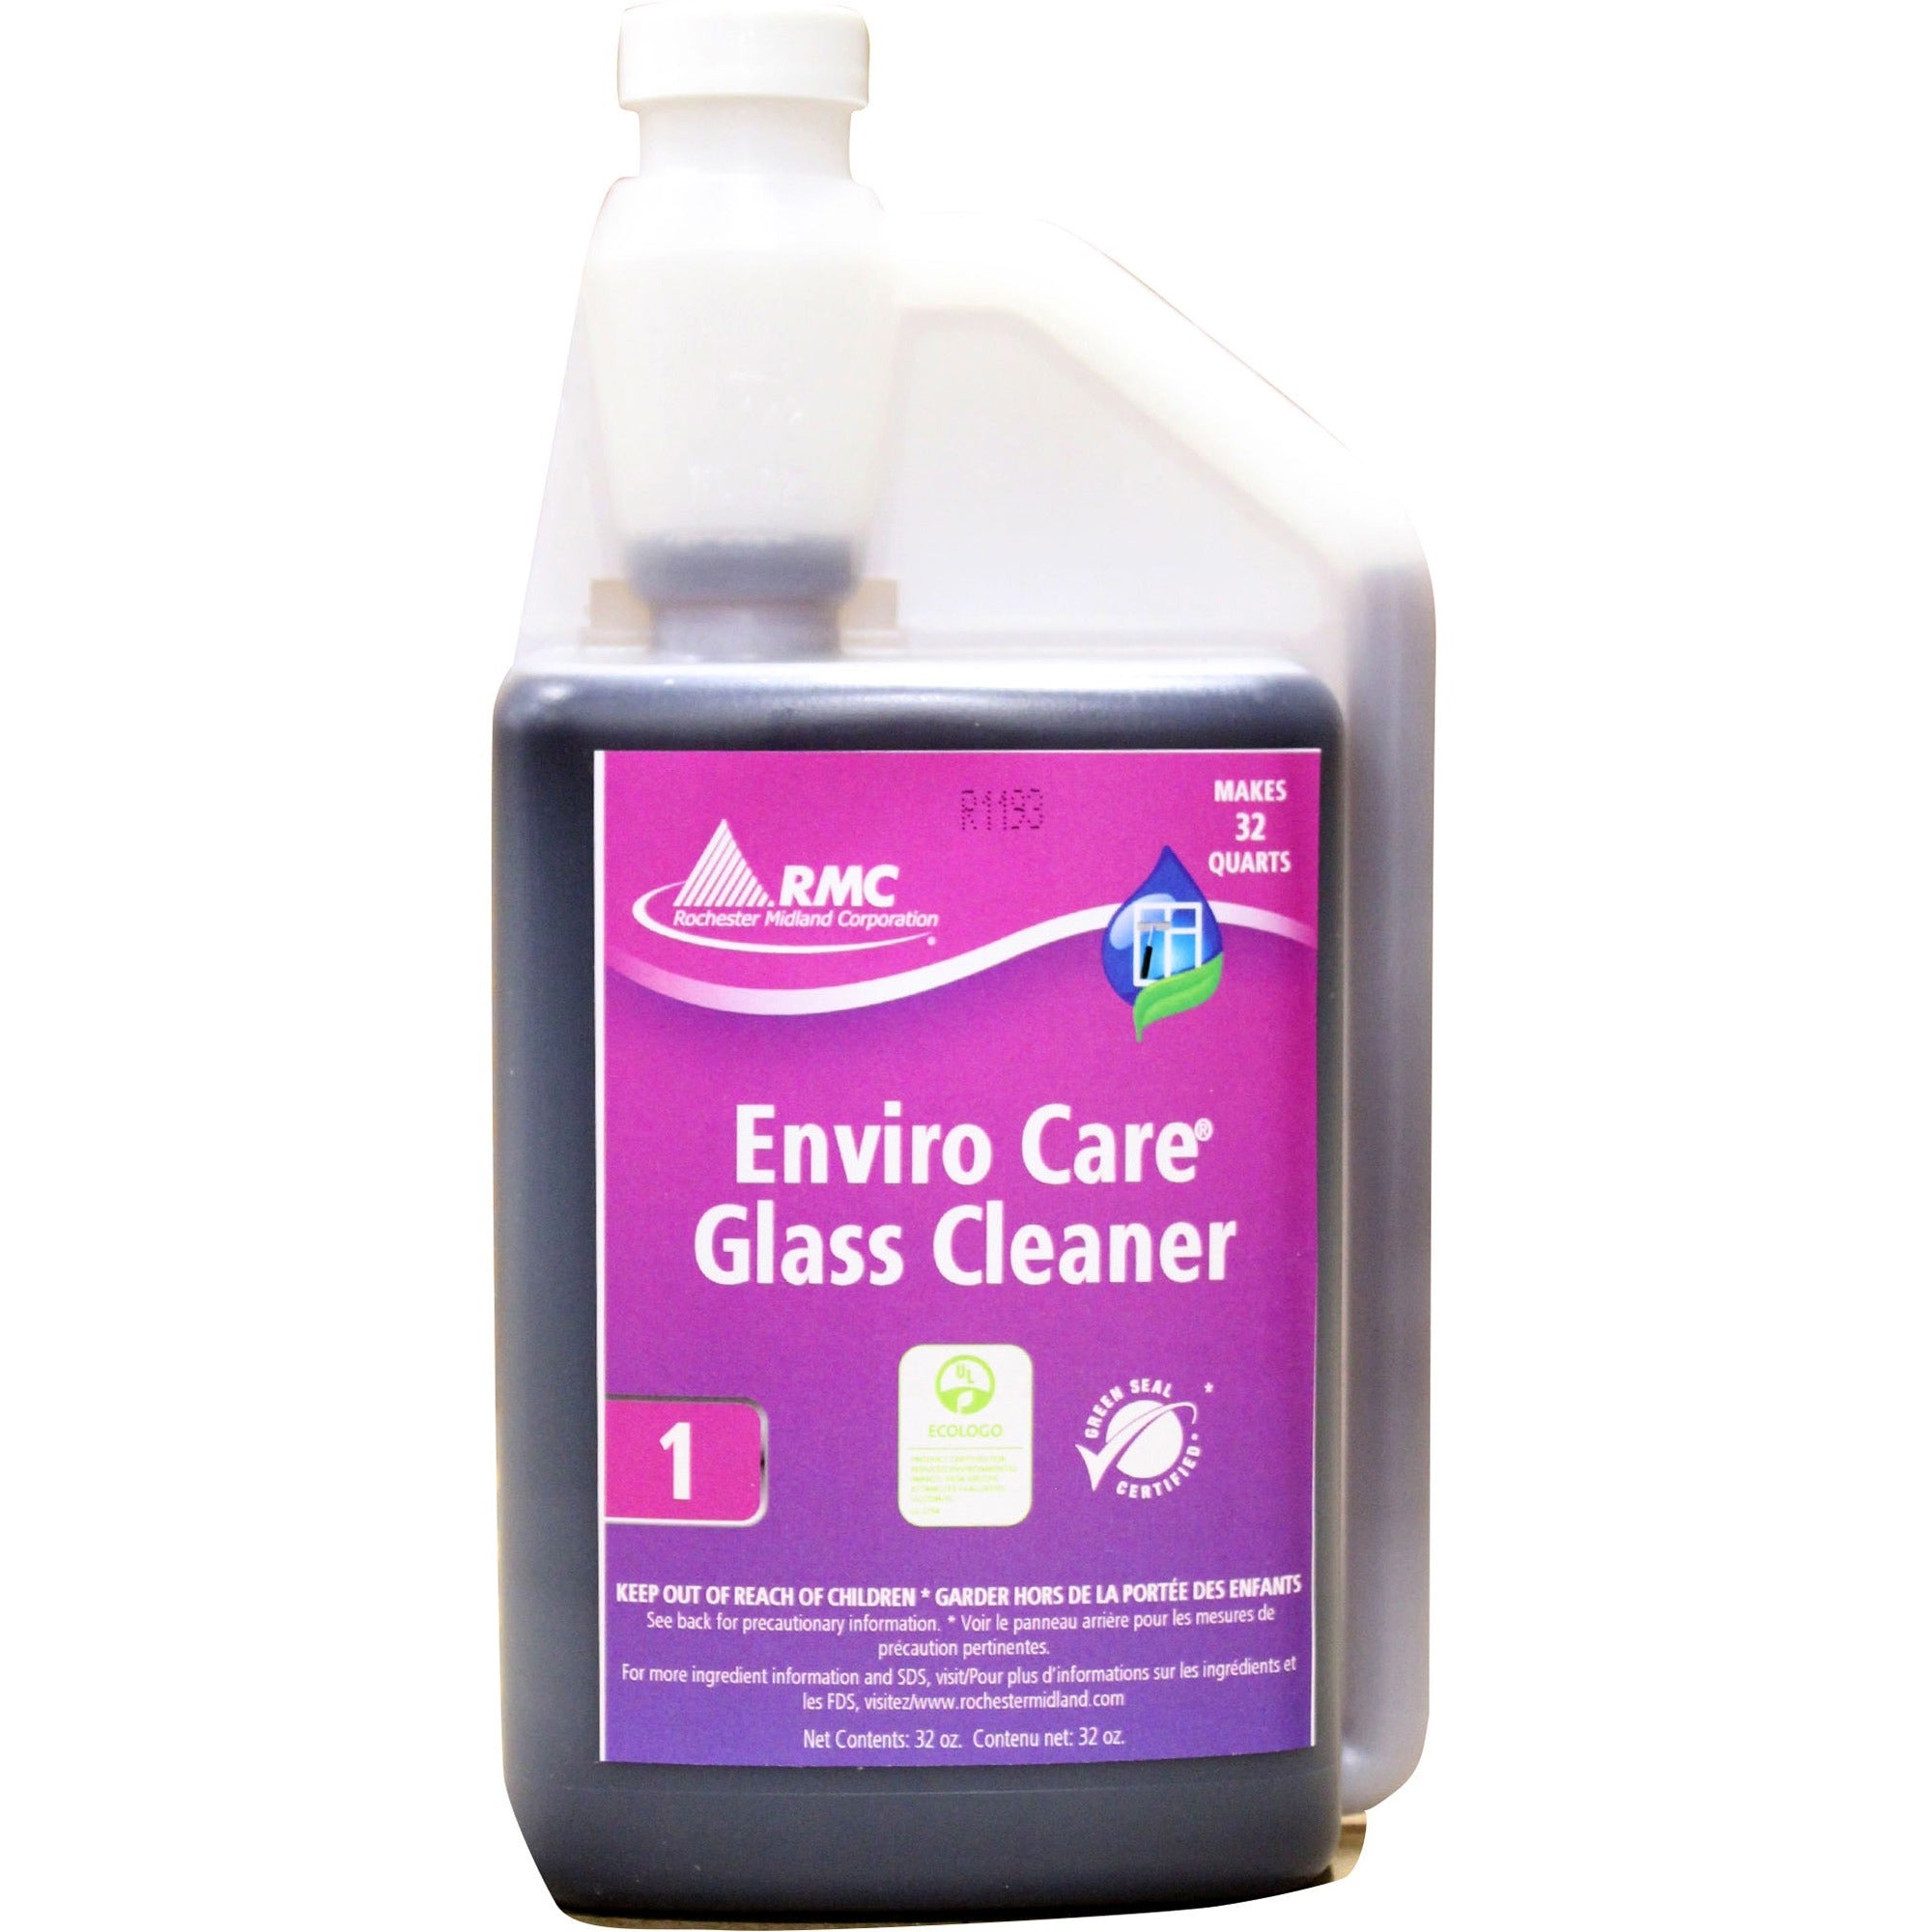 RMC Enviro Care Glass Cleaner - For Multipurpose - Concentrate - 32 fl oz (1 quart) - 1 Each - Streak-free, Alcohol-free, Ammonia-free, Dilutable - Purple - 